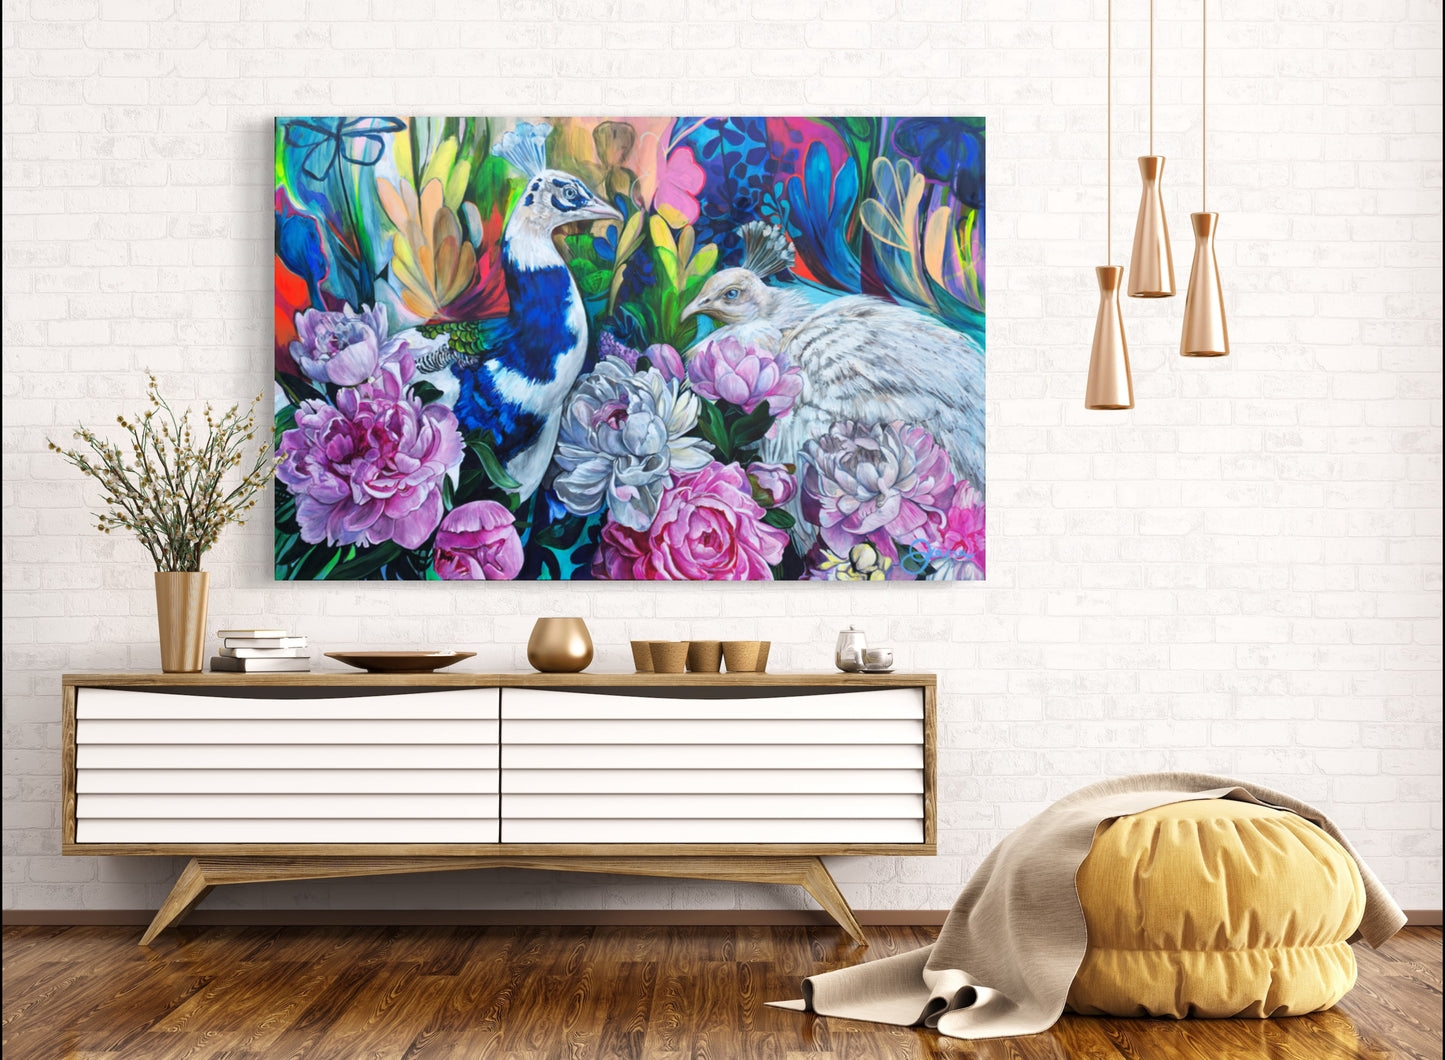 Pearl Embellished Canvas Print